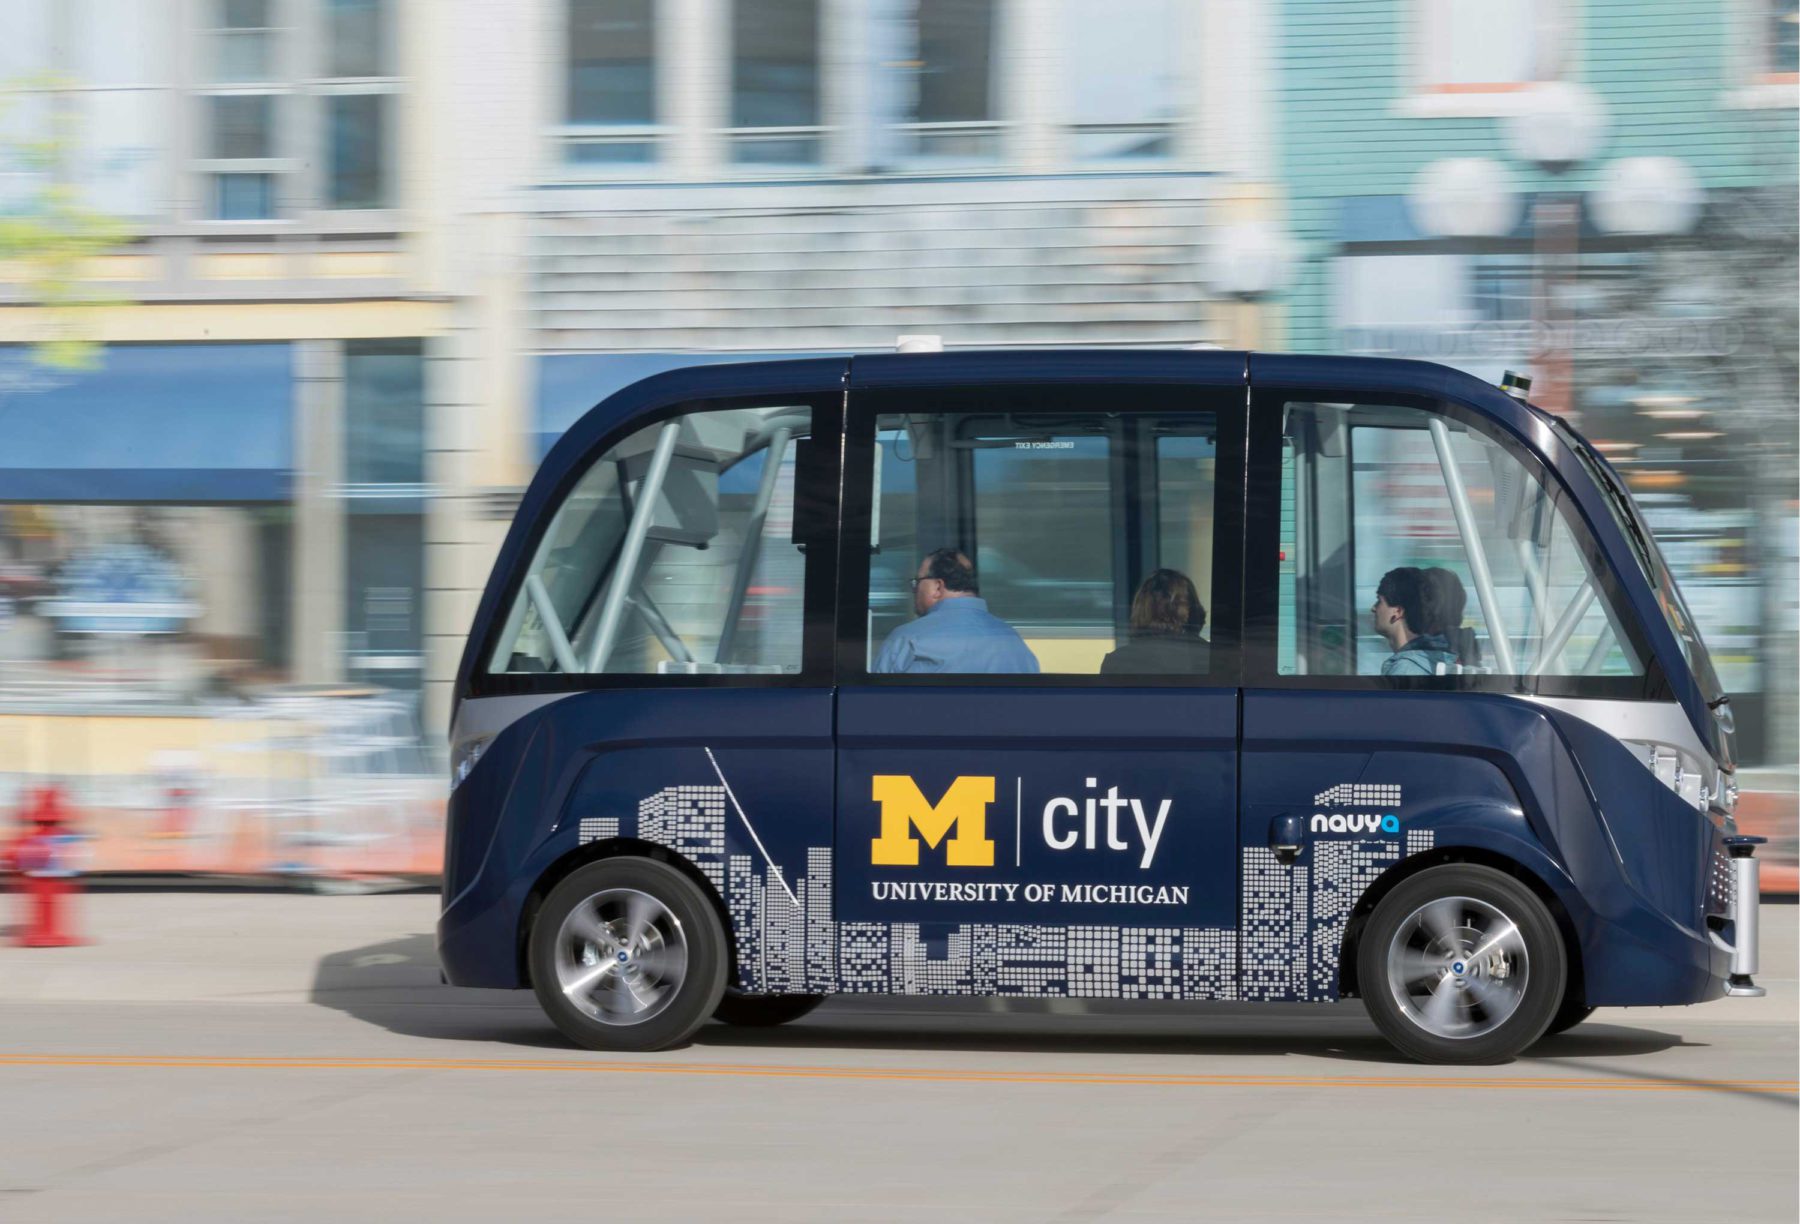 Driverless shuttle at M city test facility